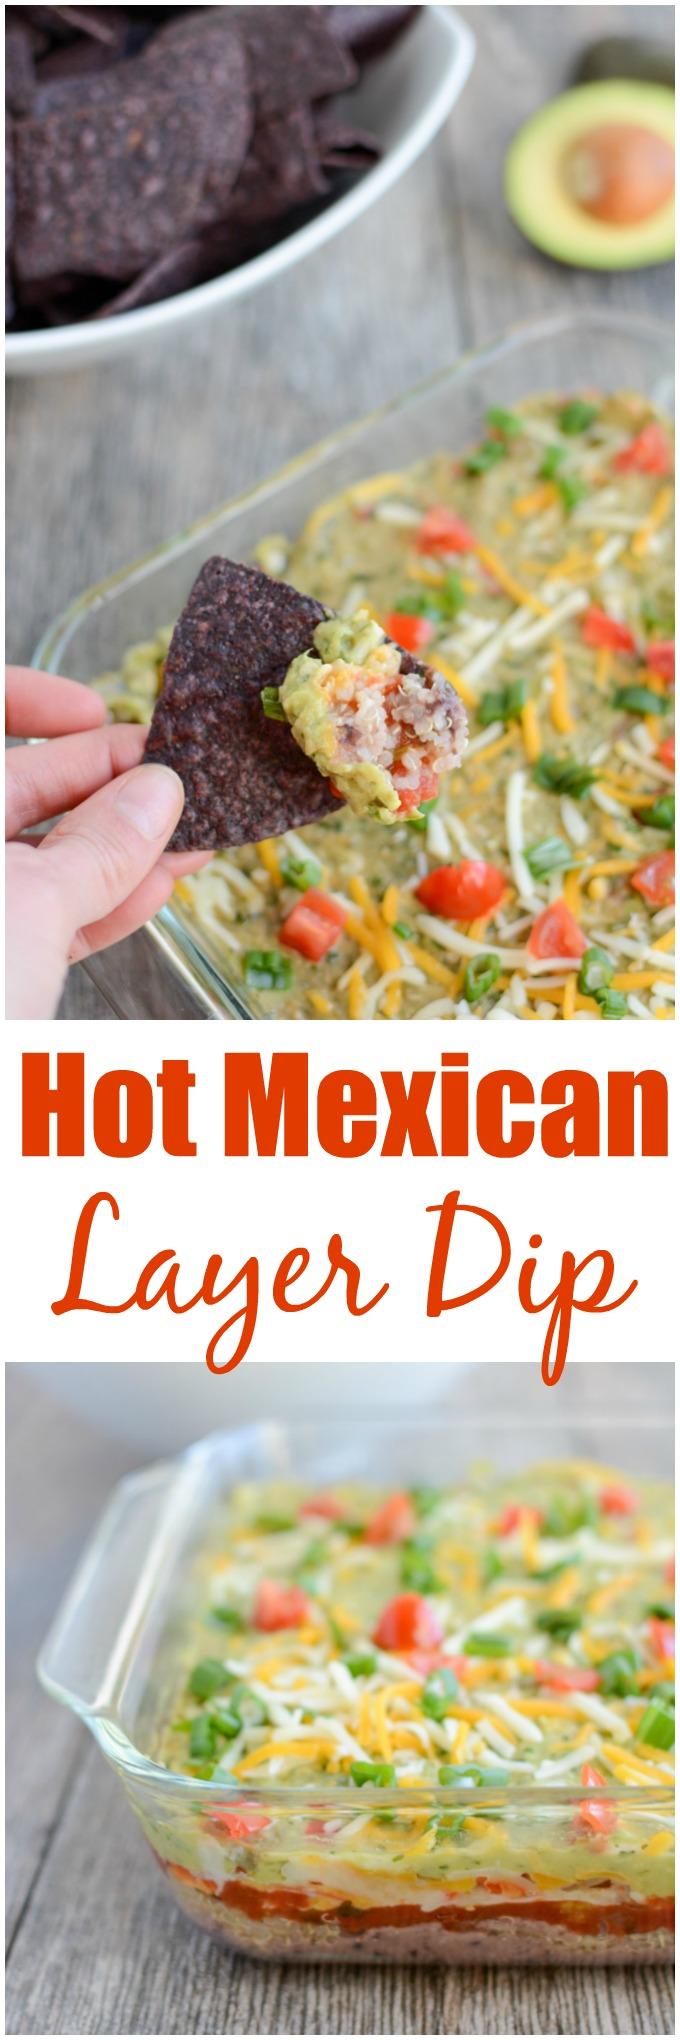 This recipe for Hot Mexican Layer Dip is an easy, healthy appetizer that's perfect for parties, game days and other gatherings. Plus it's full of protein thanks to the quinoa, cottage cheese and black beans so you can feel good about eating it!